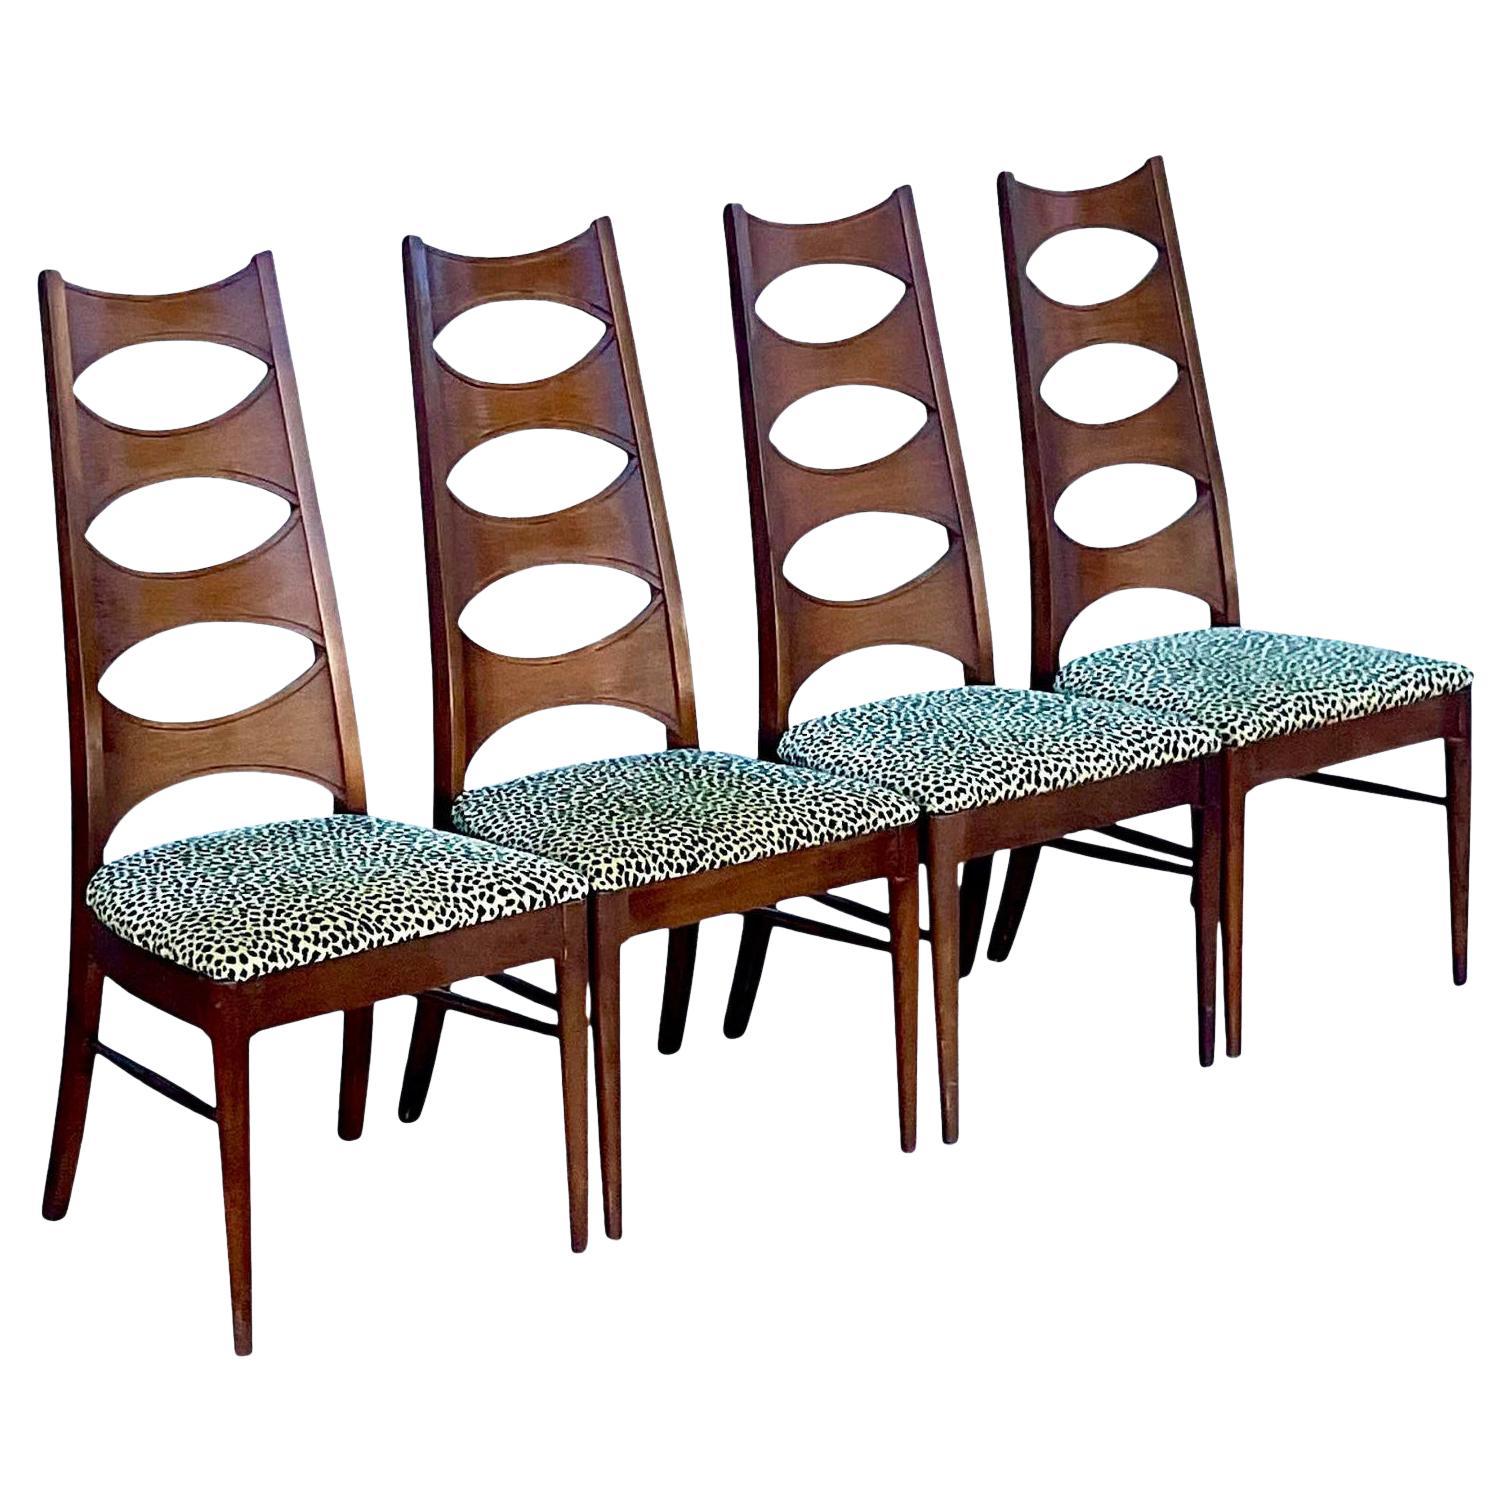 Midcentury Kent Coffey Perspecta “Cats Eye” Dining Chairs, Set of 4